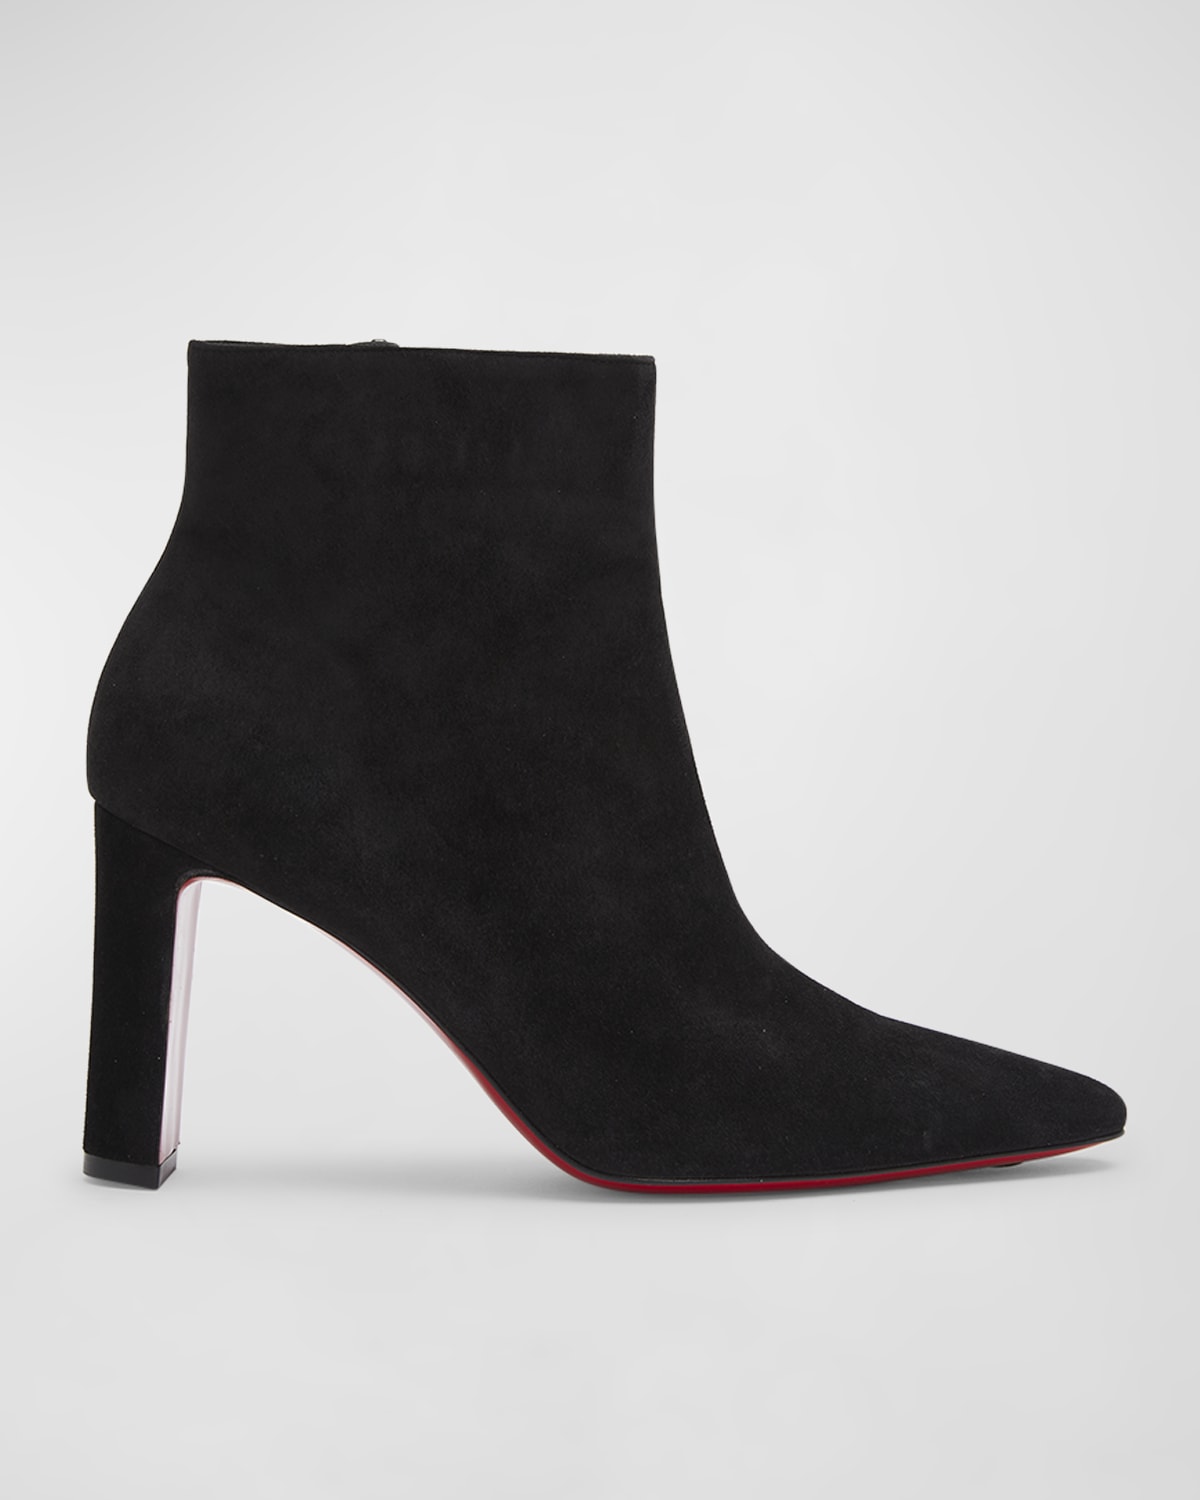 Christian Louboutin Kate Perforated Red Sole Ankle Booties | Neiman Marcus